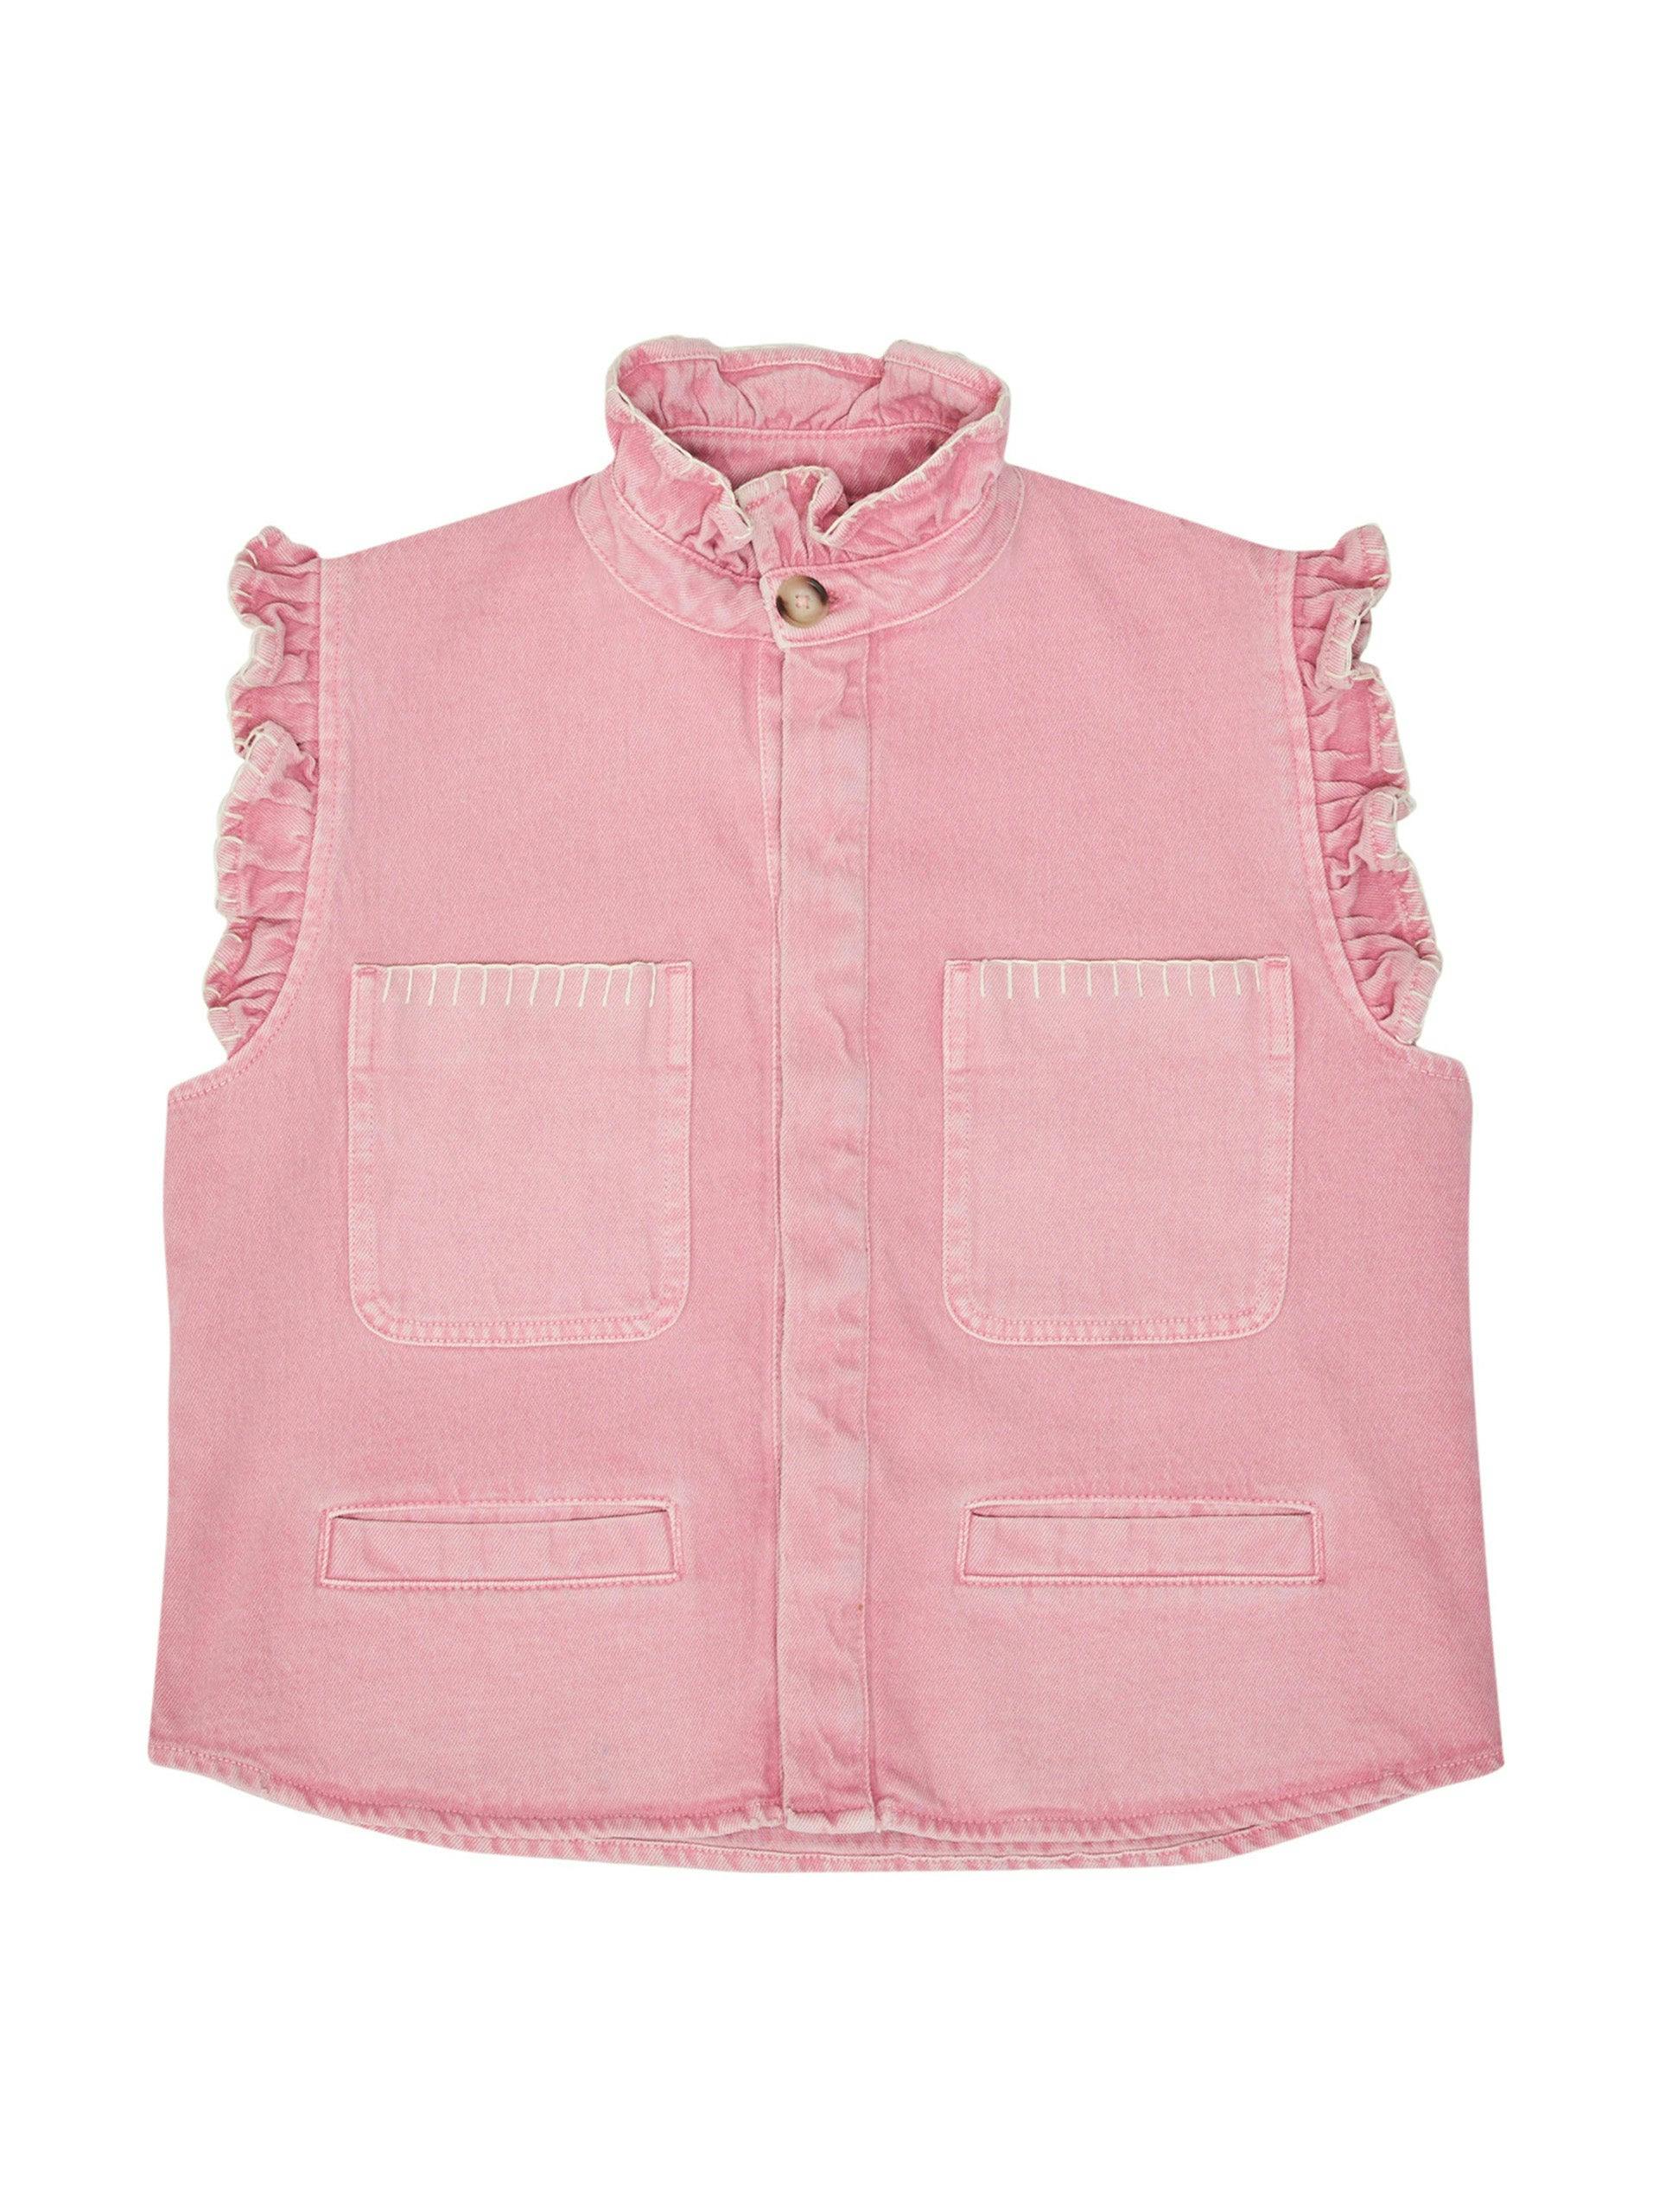 Washed candy floss Pablo waistcoat